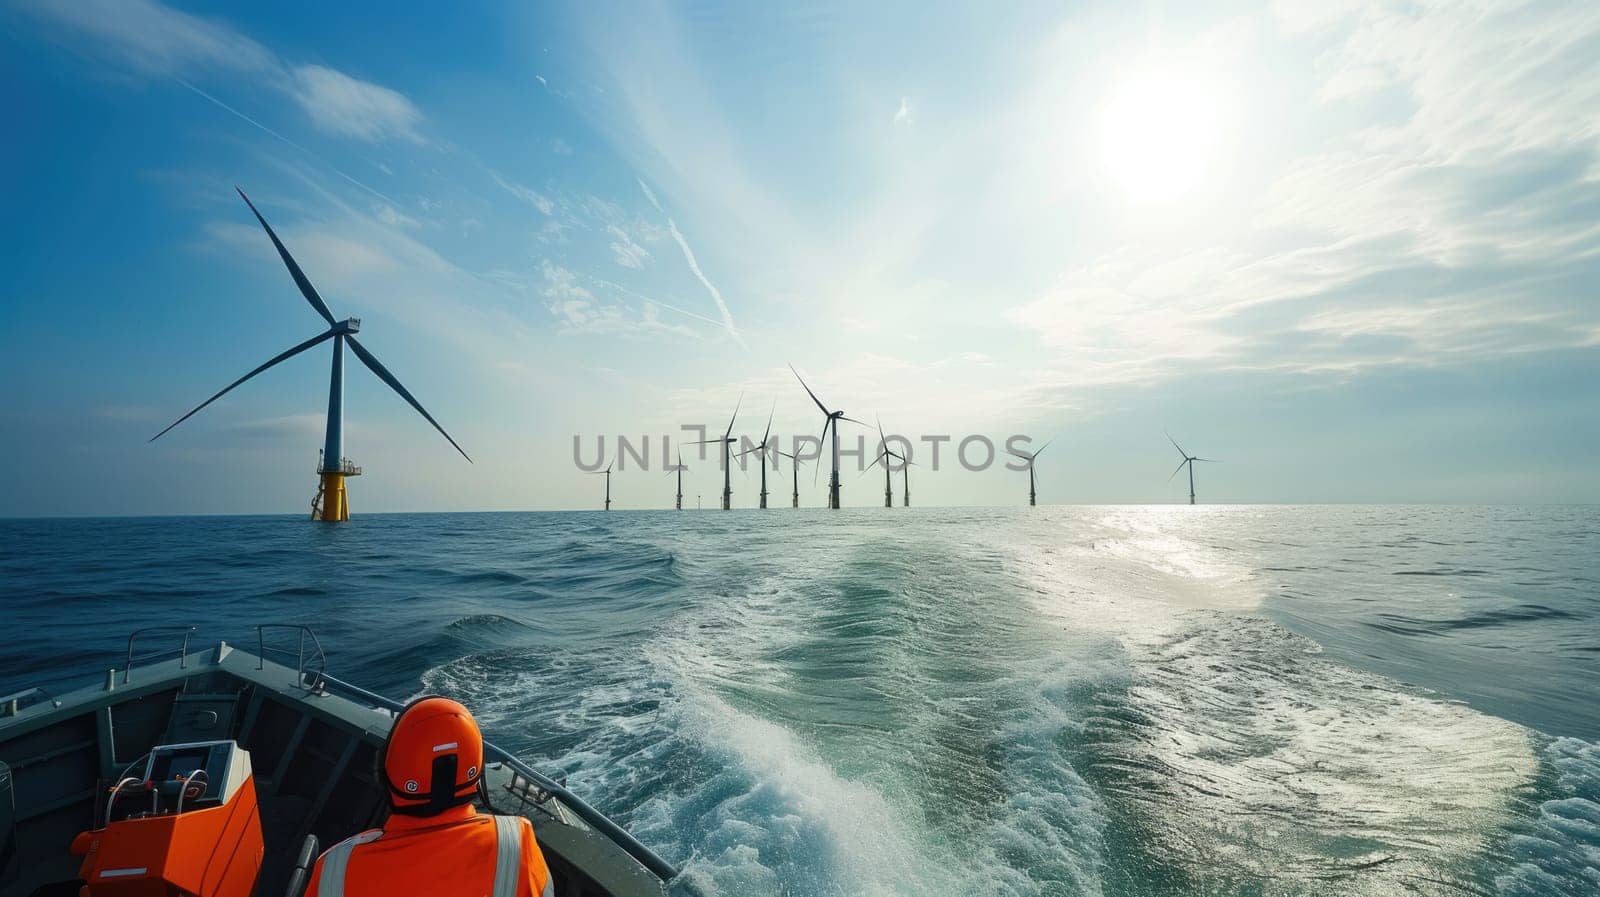 Observing ocean wind turbines from a boat in the water. AIG41 by biancoblue